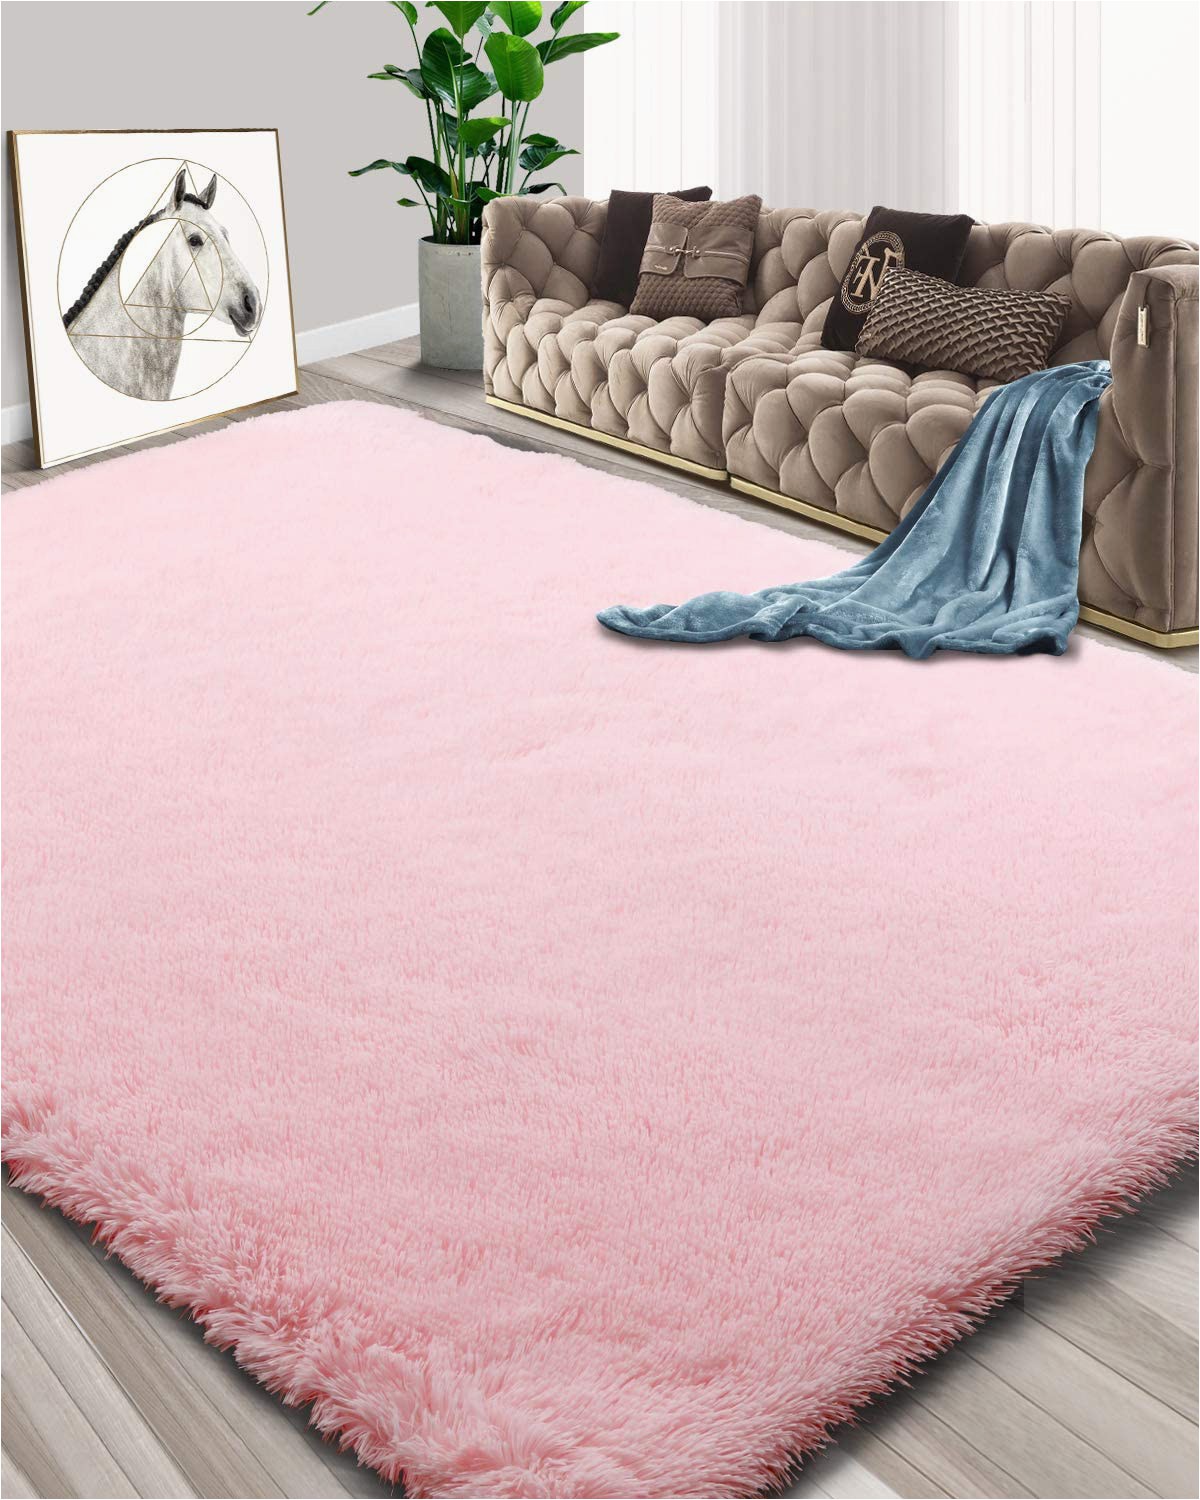 Area Rugs for College Dorms Foxmas Ultra soft Fluffy area Rugs for Bedroom Kids Room Plush Shaggy Nursery Rug Furry Throw Carpets for Boys Girls College Dorm Fuzzy Rugs Living